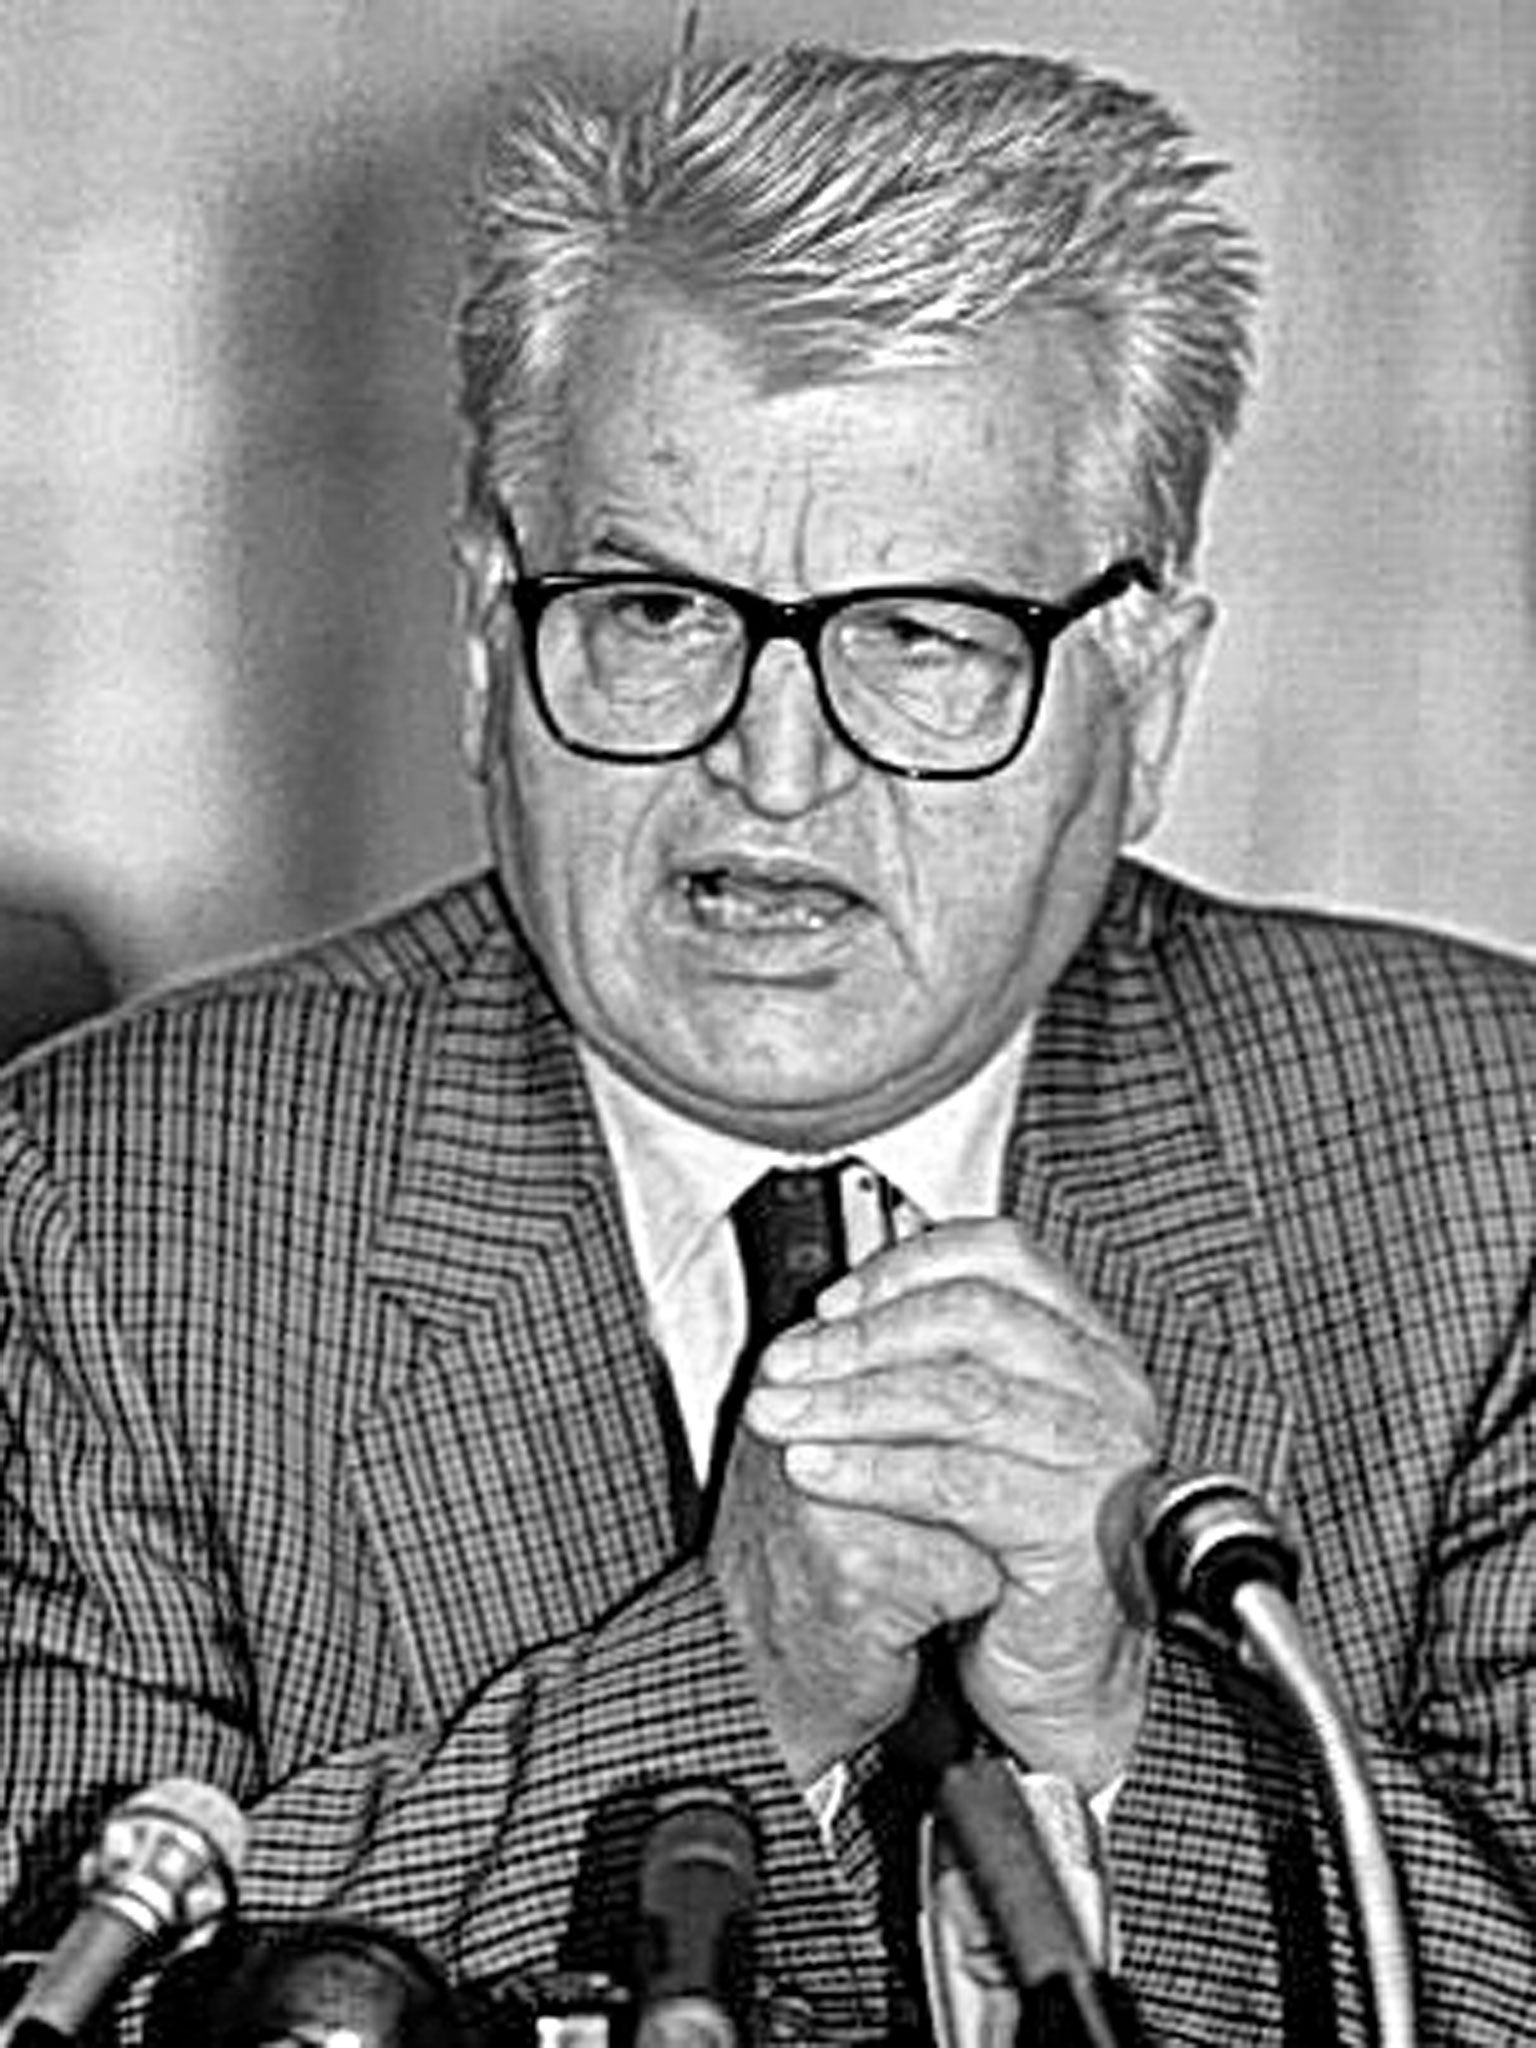 Cosic, then president of Yugoslavia, at a press conference in Belgrade in 1992